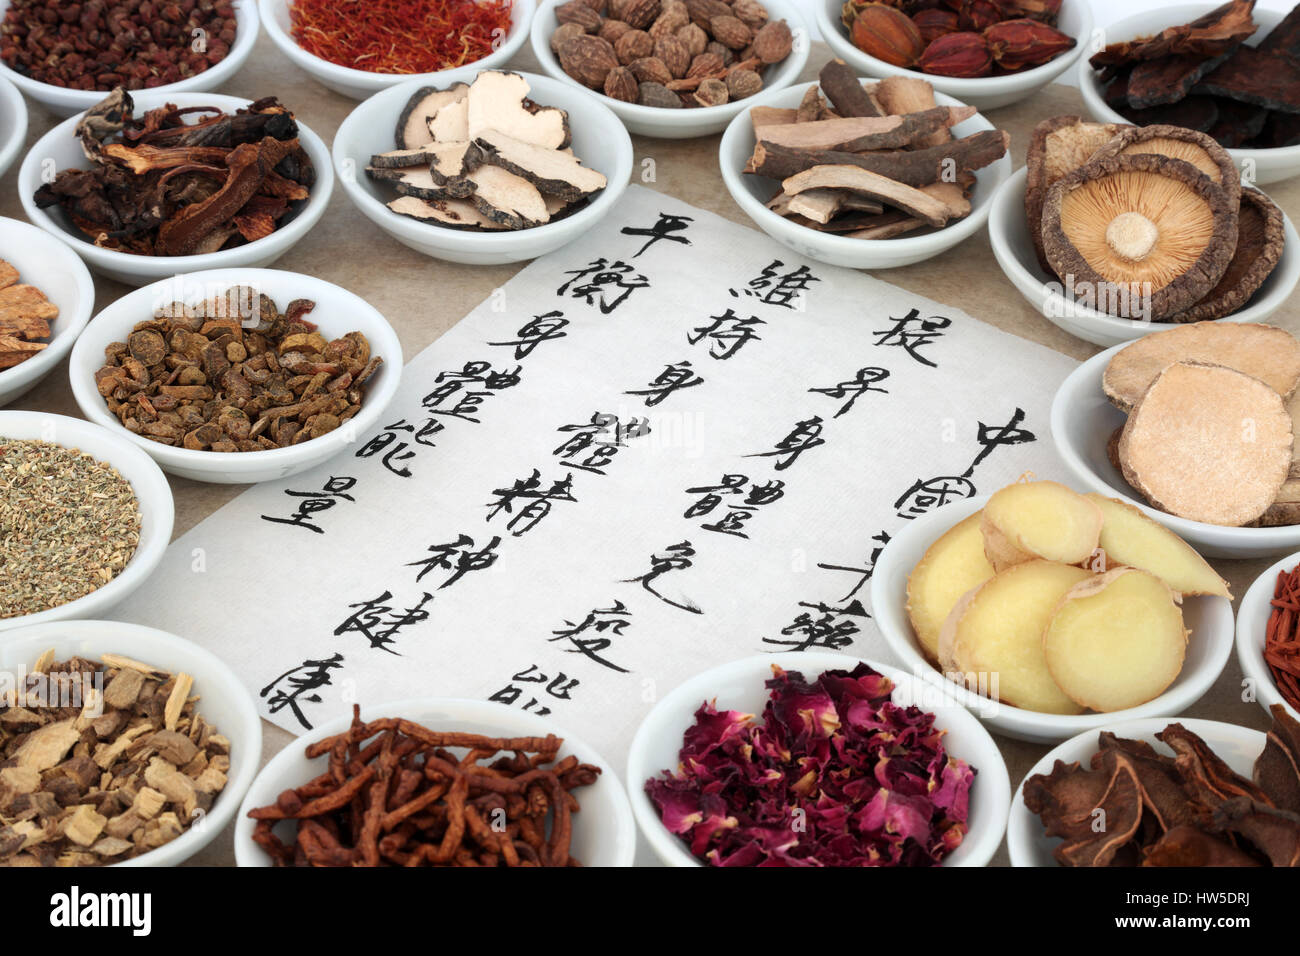 Traditional chinese medicinal herb selection in porcelain bowls with calligraphy script on rice paper. Translation describes chinese herbal medicine a Stock Photo